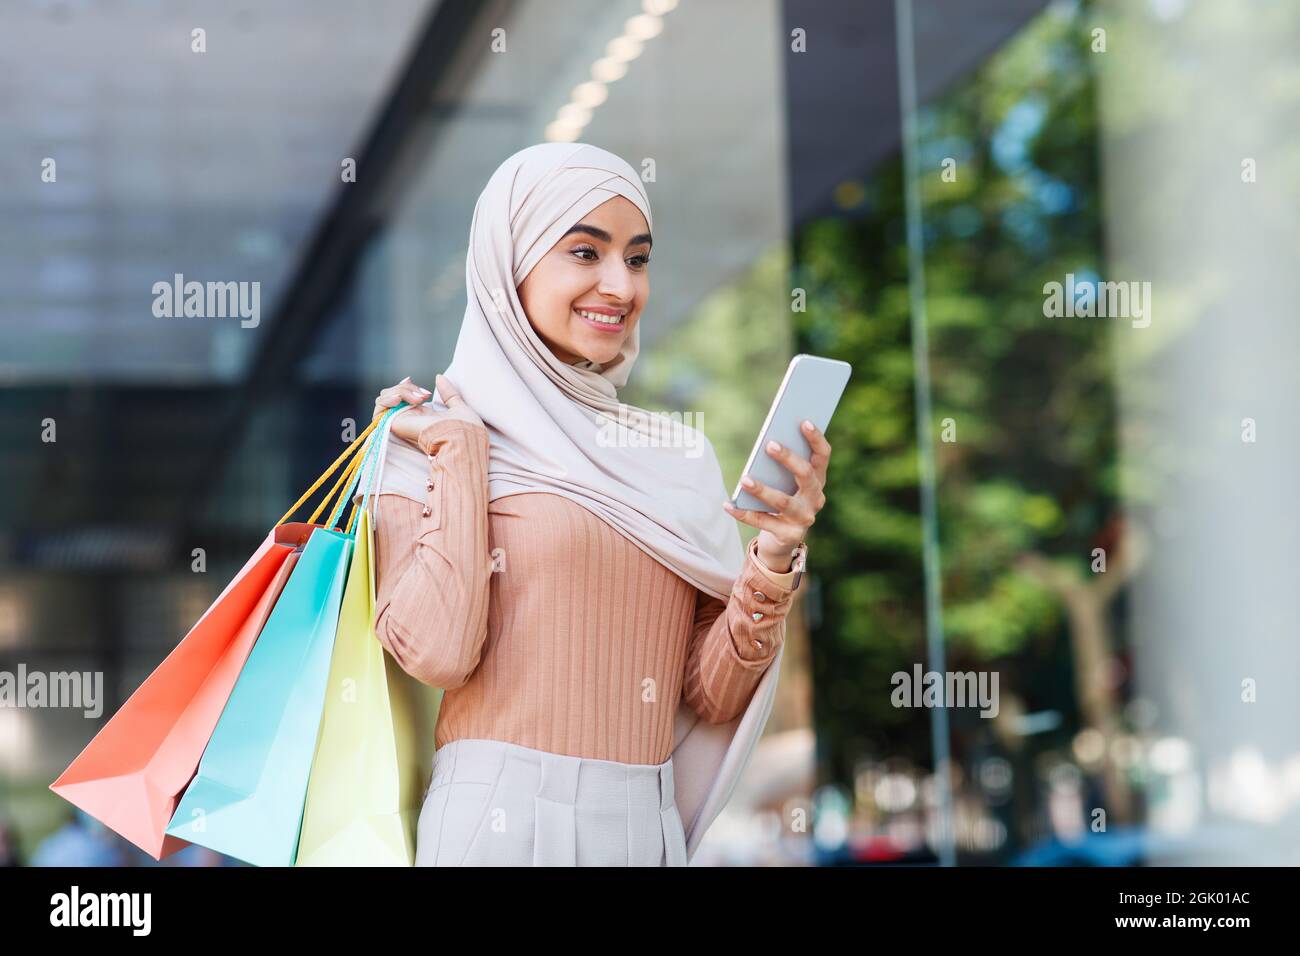 Satisfied cute young middle eastern female in hijab with many packets, texting message on smartphone near mall Stock Photo